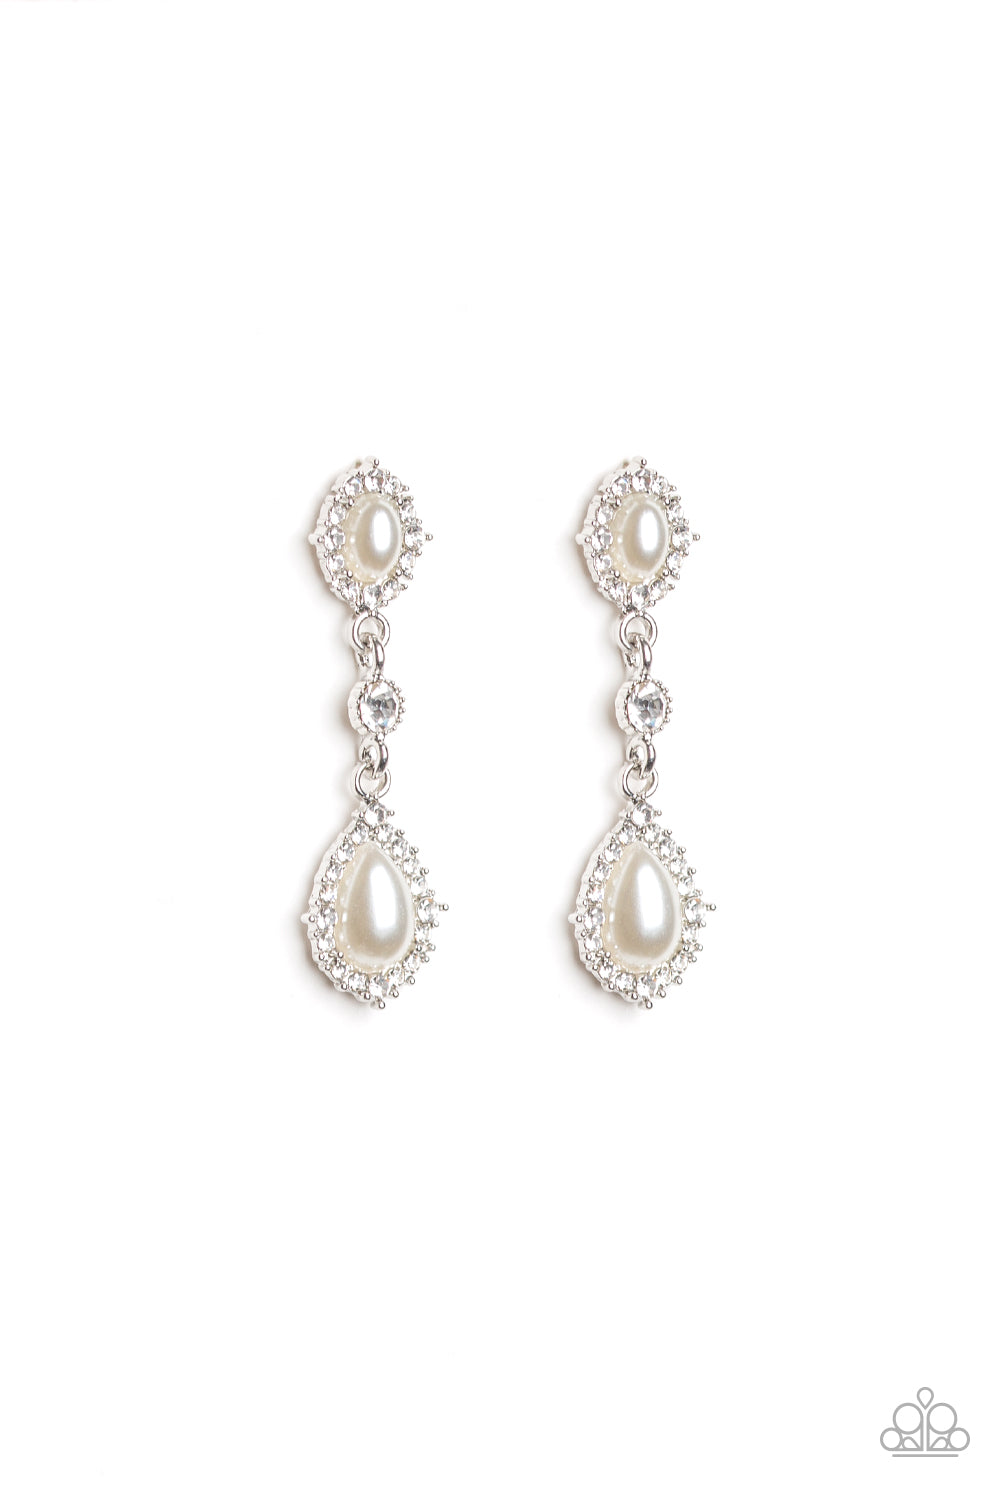 Paparazzi Accessories All-GLOWING - White Earrings solitaire white rhinestone is linked between two pearly white rhinestone encrusted frames, creating an elegant lure. Earring attaches to a standard post fitting.  Sold as one pair of post earrings.